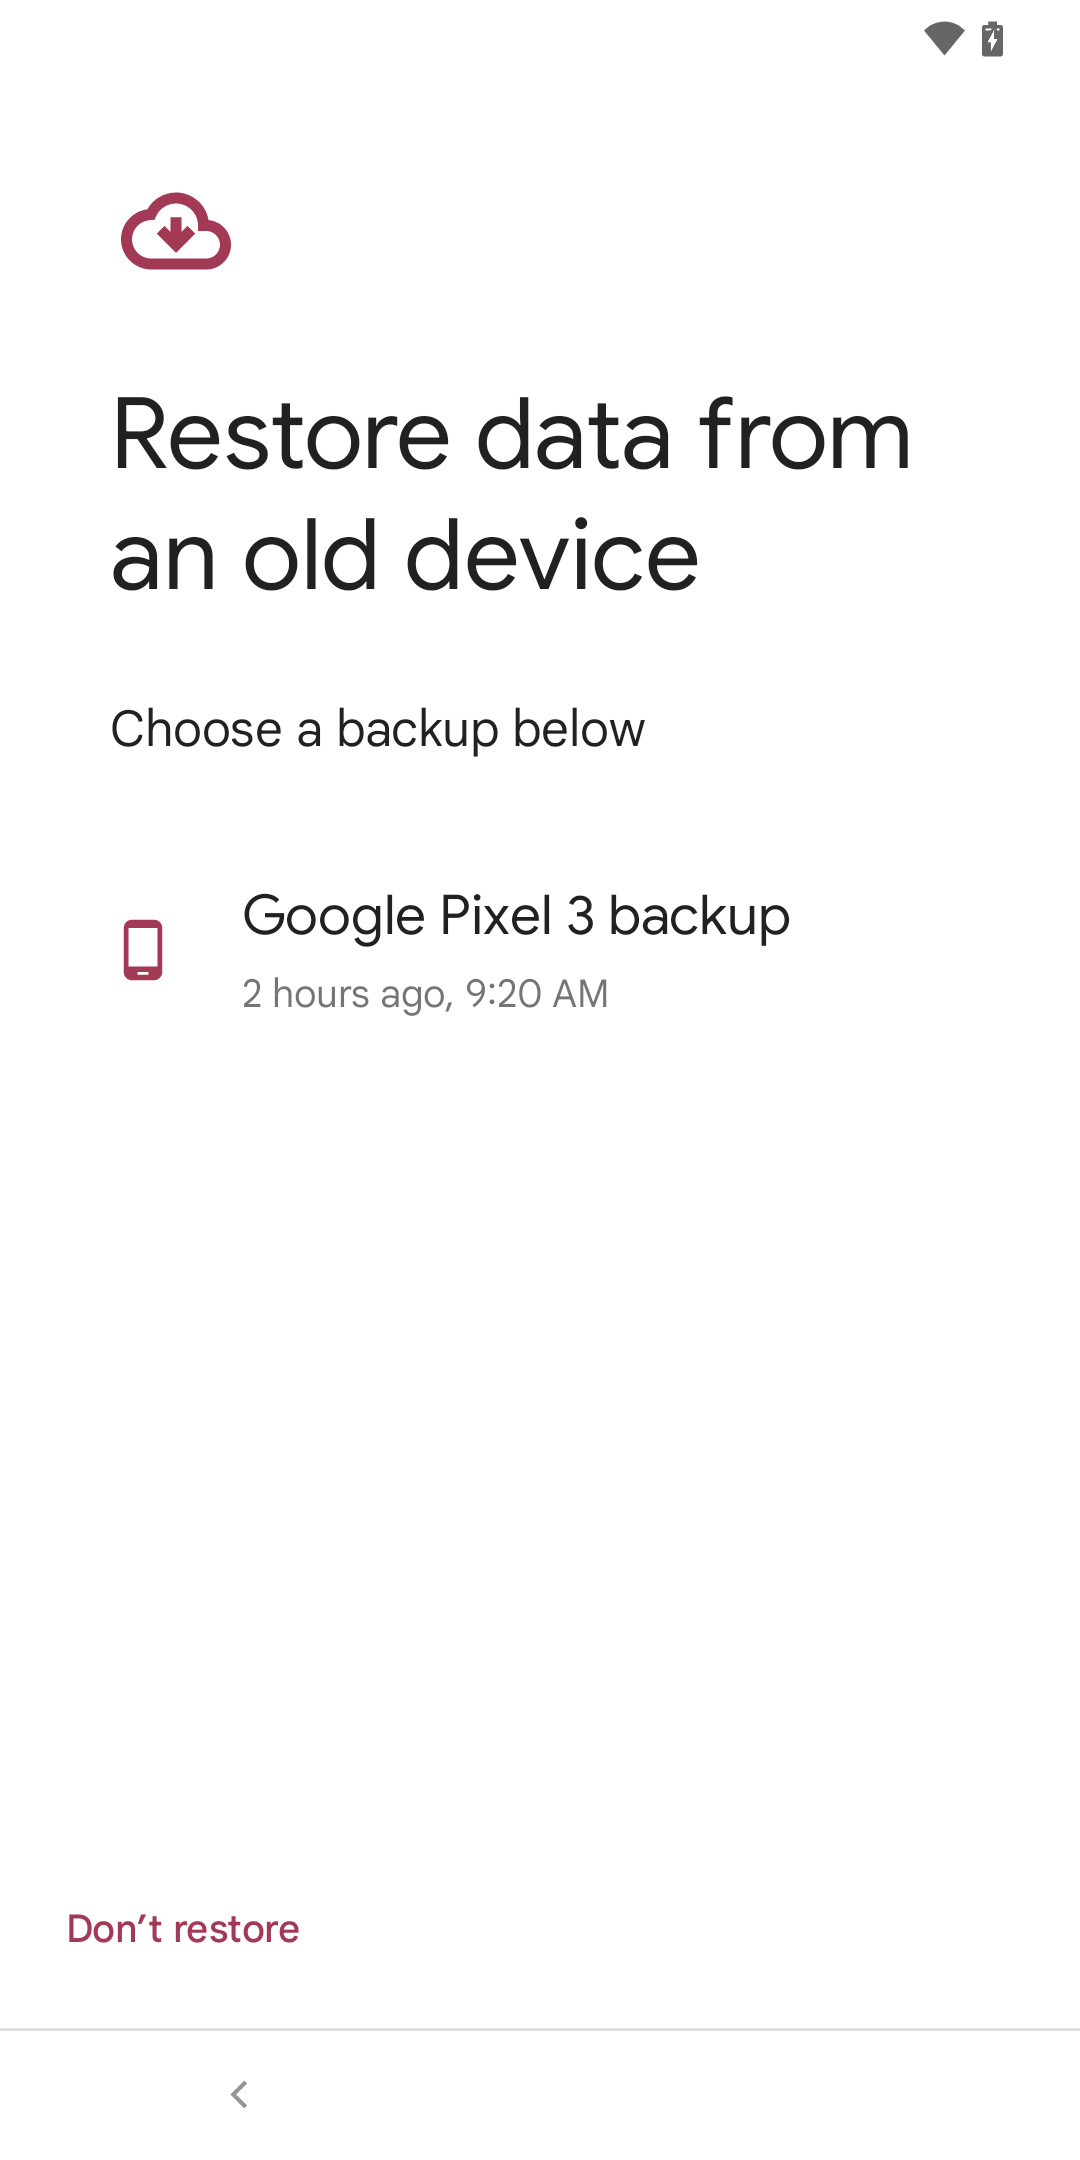 Page: Restore data from an old device